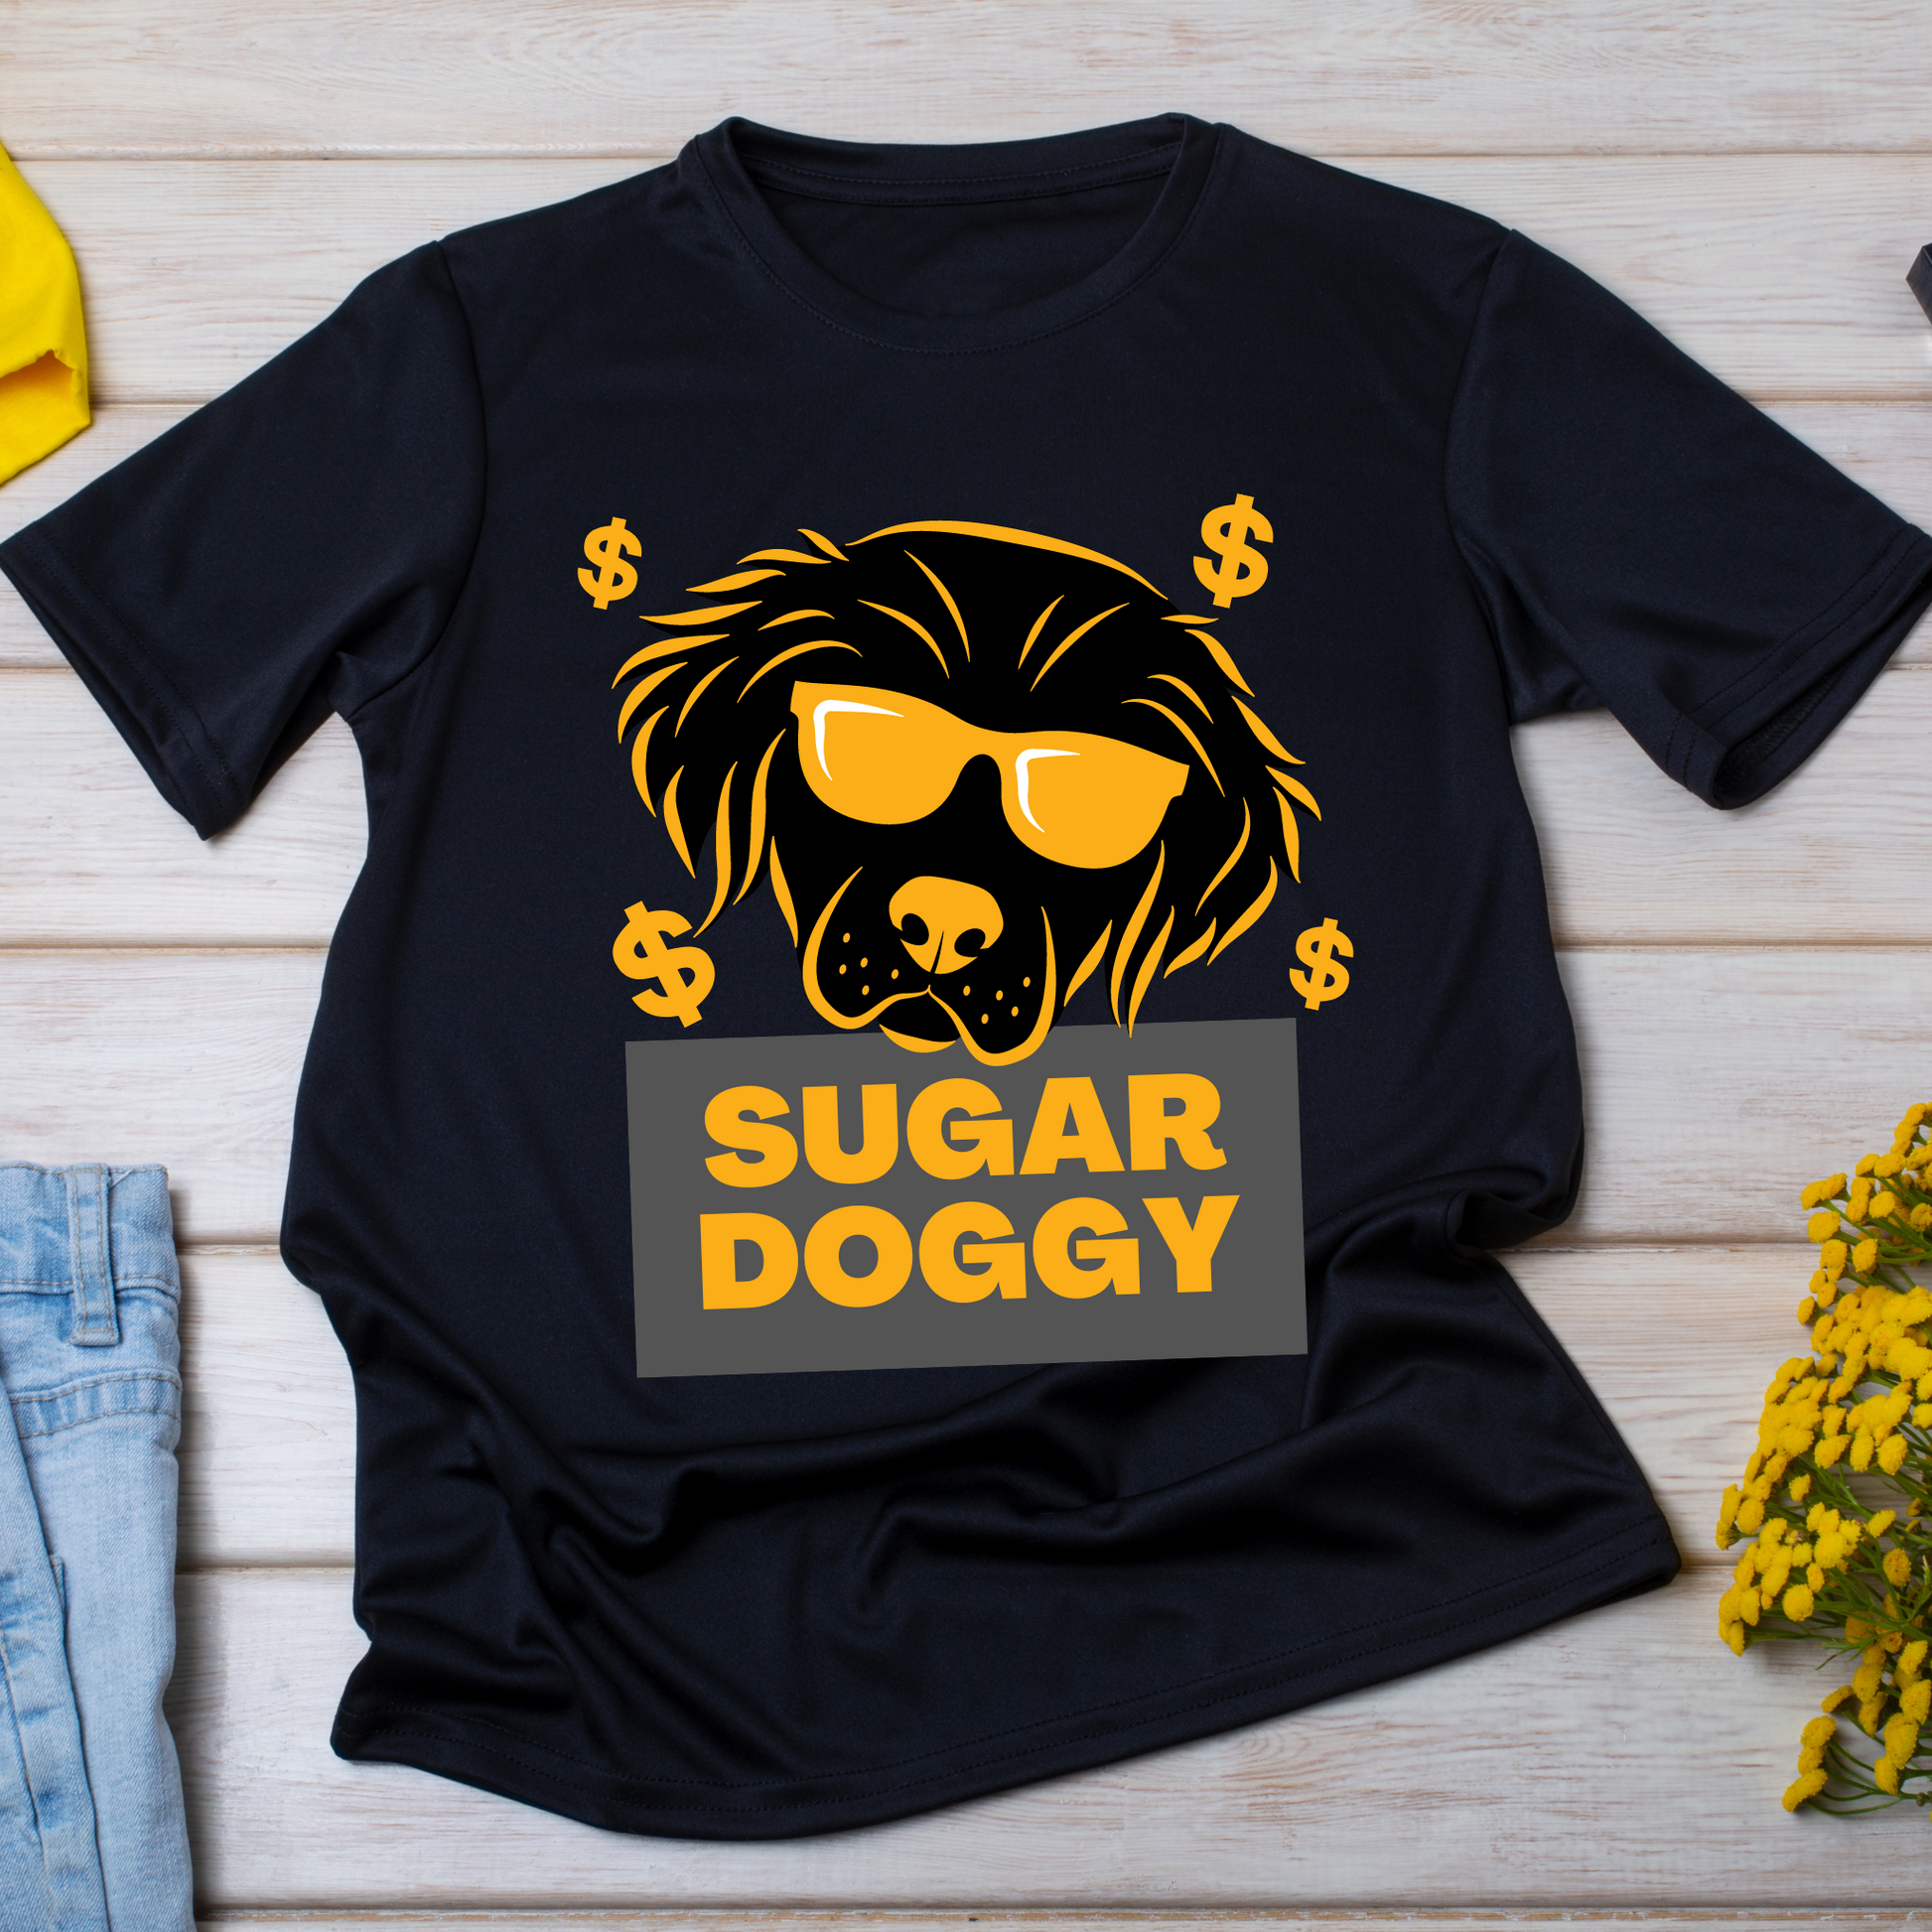 Sugar doggy awesome ladies tee animal t-shirt for women - Premium t-shirt from Lees Krazy Teez - Just $21.95! Shop now at Lees Krazy Teez